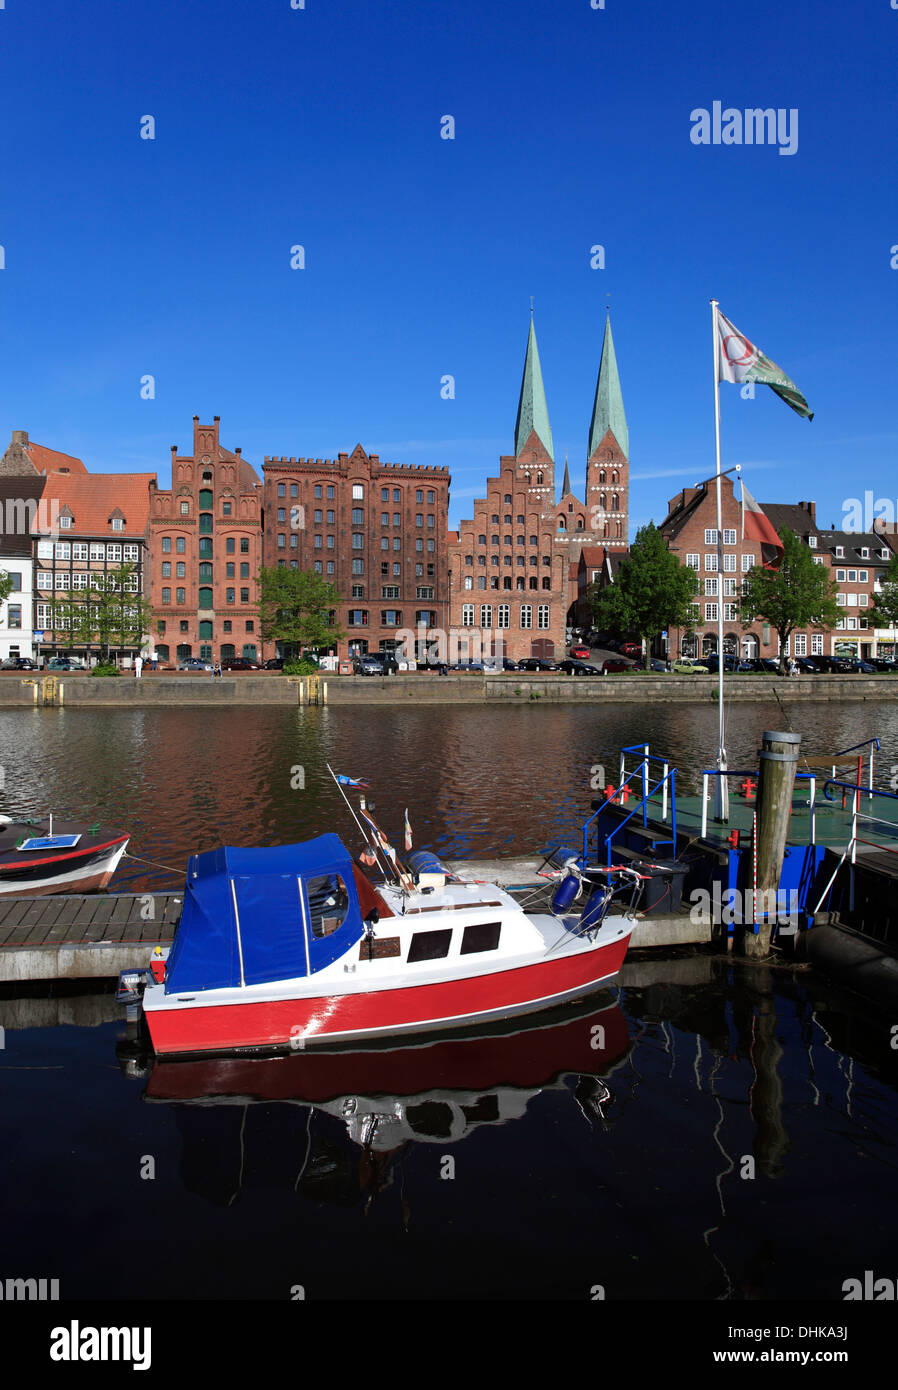 Boats on river Trave, Hanseatic town Lubeck, Schleswig-Holstein, Germany Stock Photo